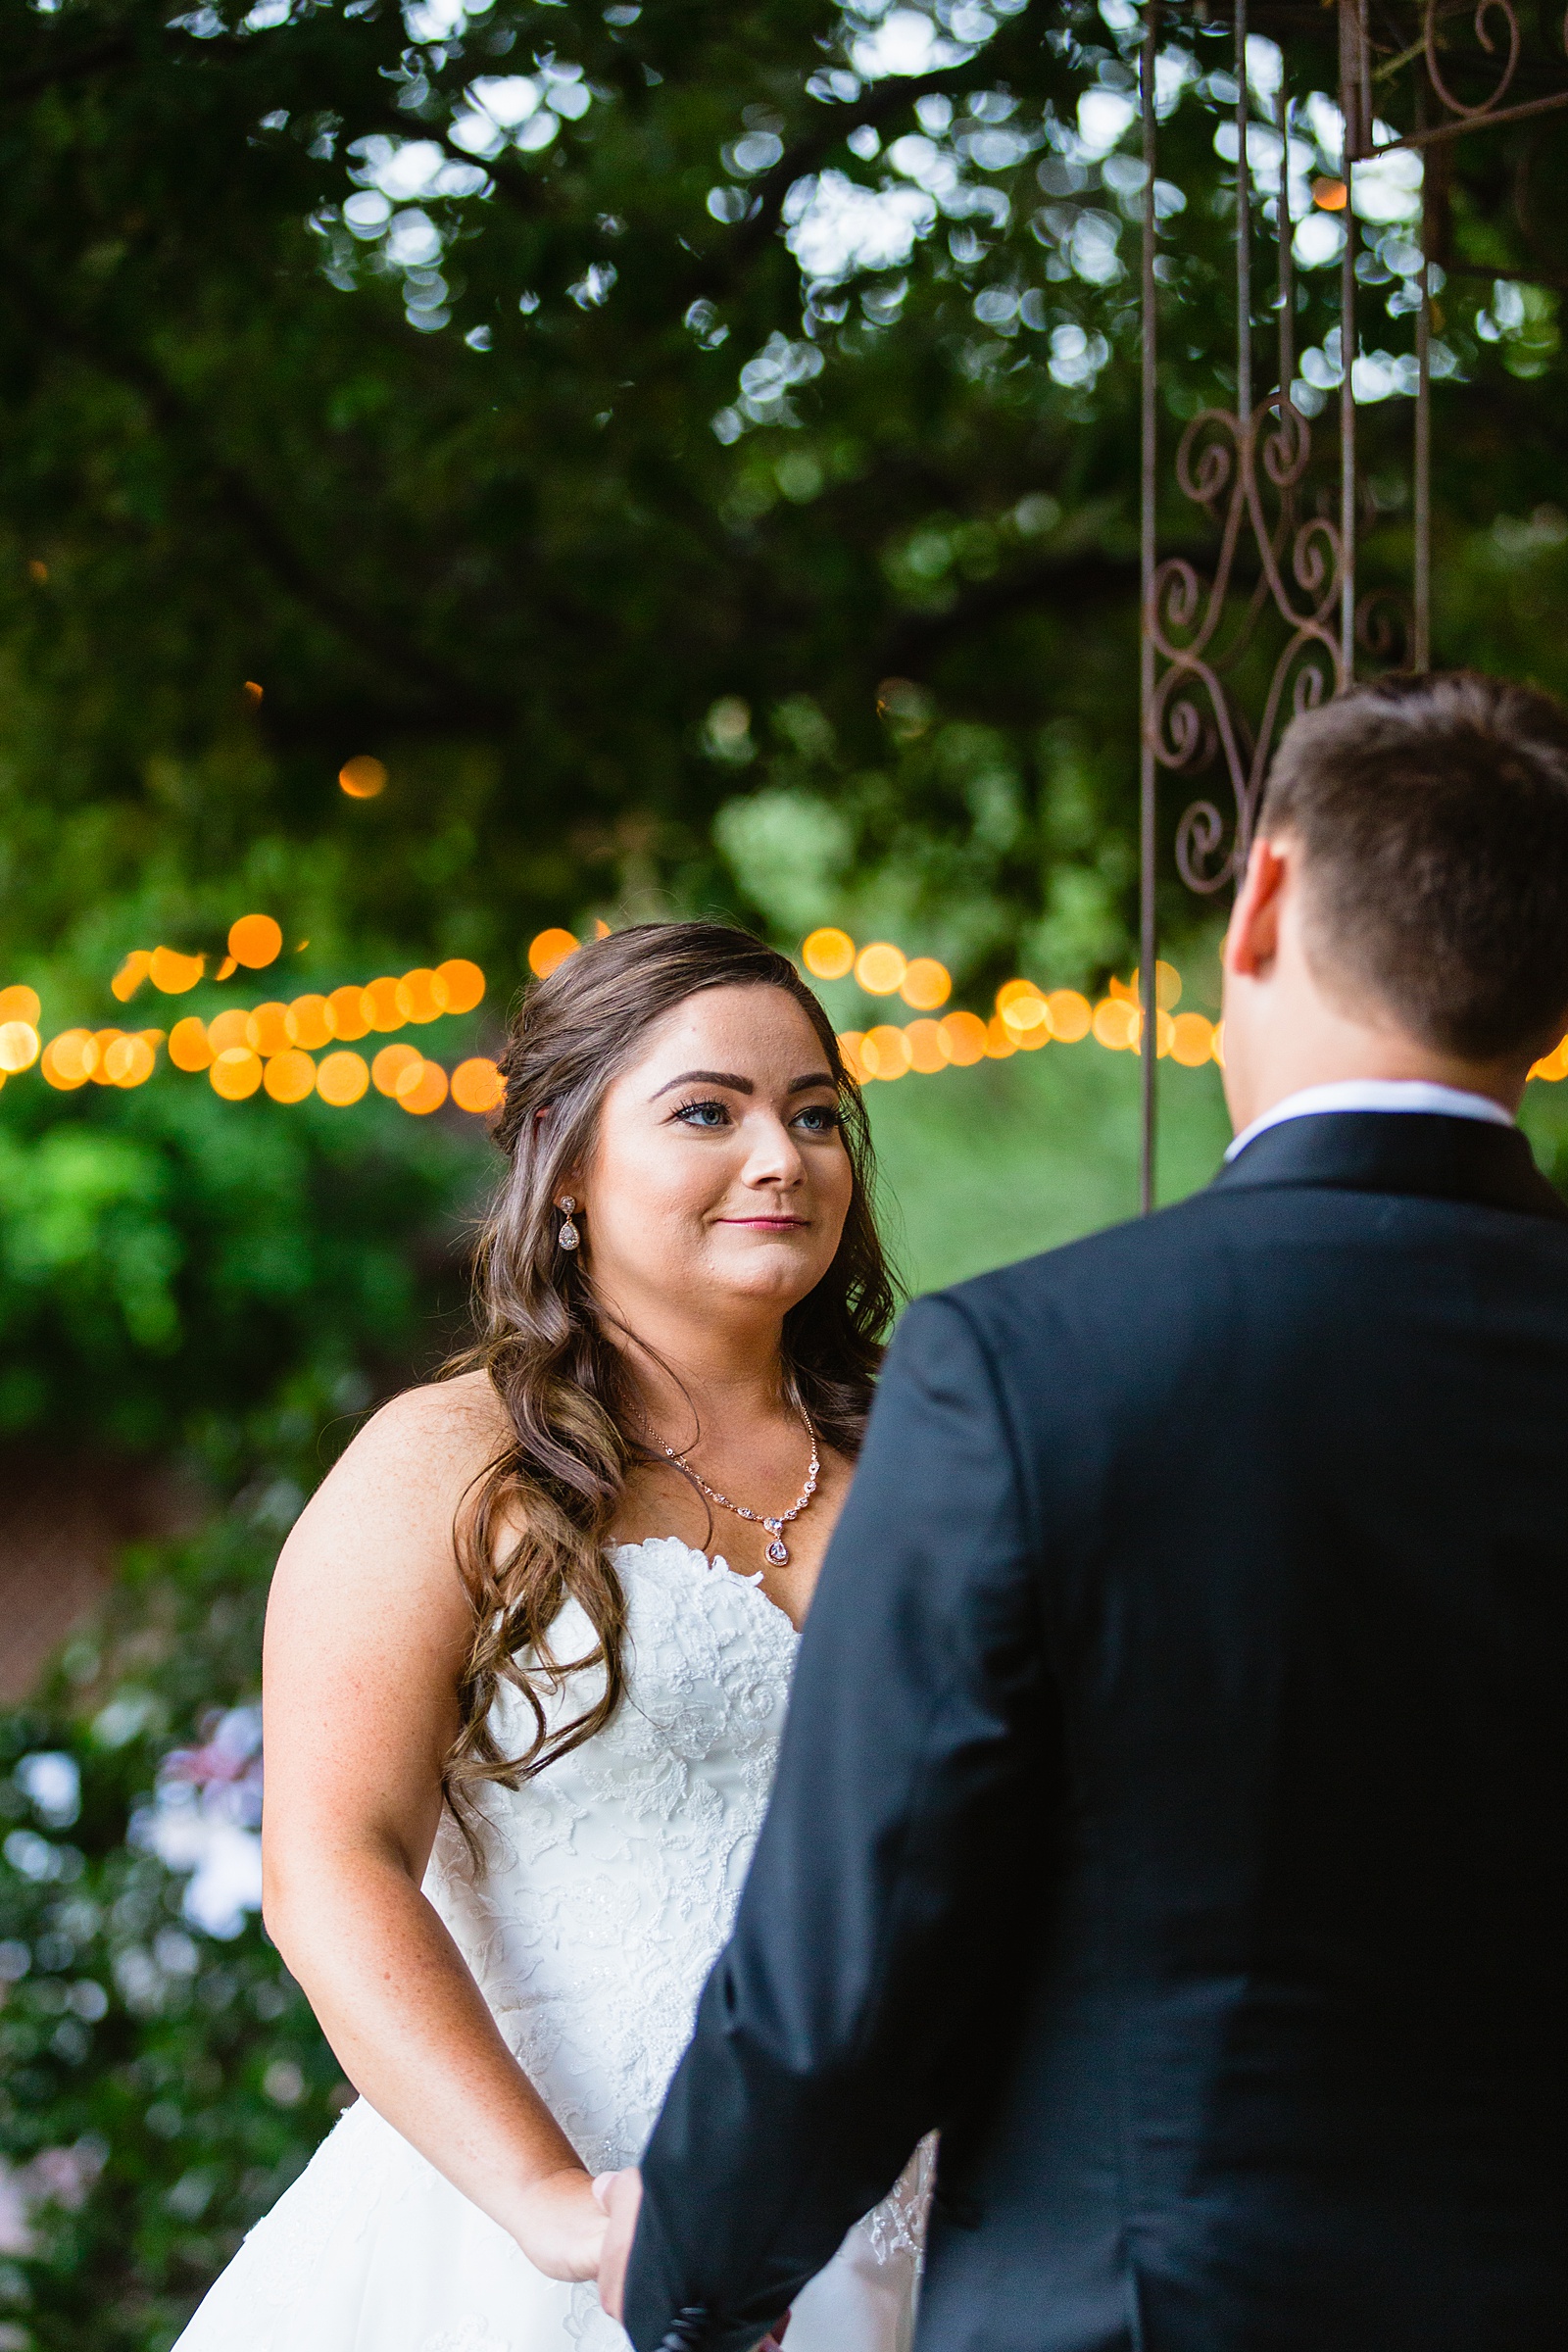 Bride looking at her groom during their wedding ceremony at Stonebridge Manor by Mesa wedding photographer PMA Photography.